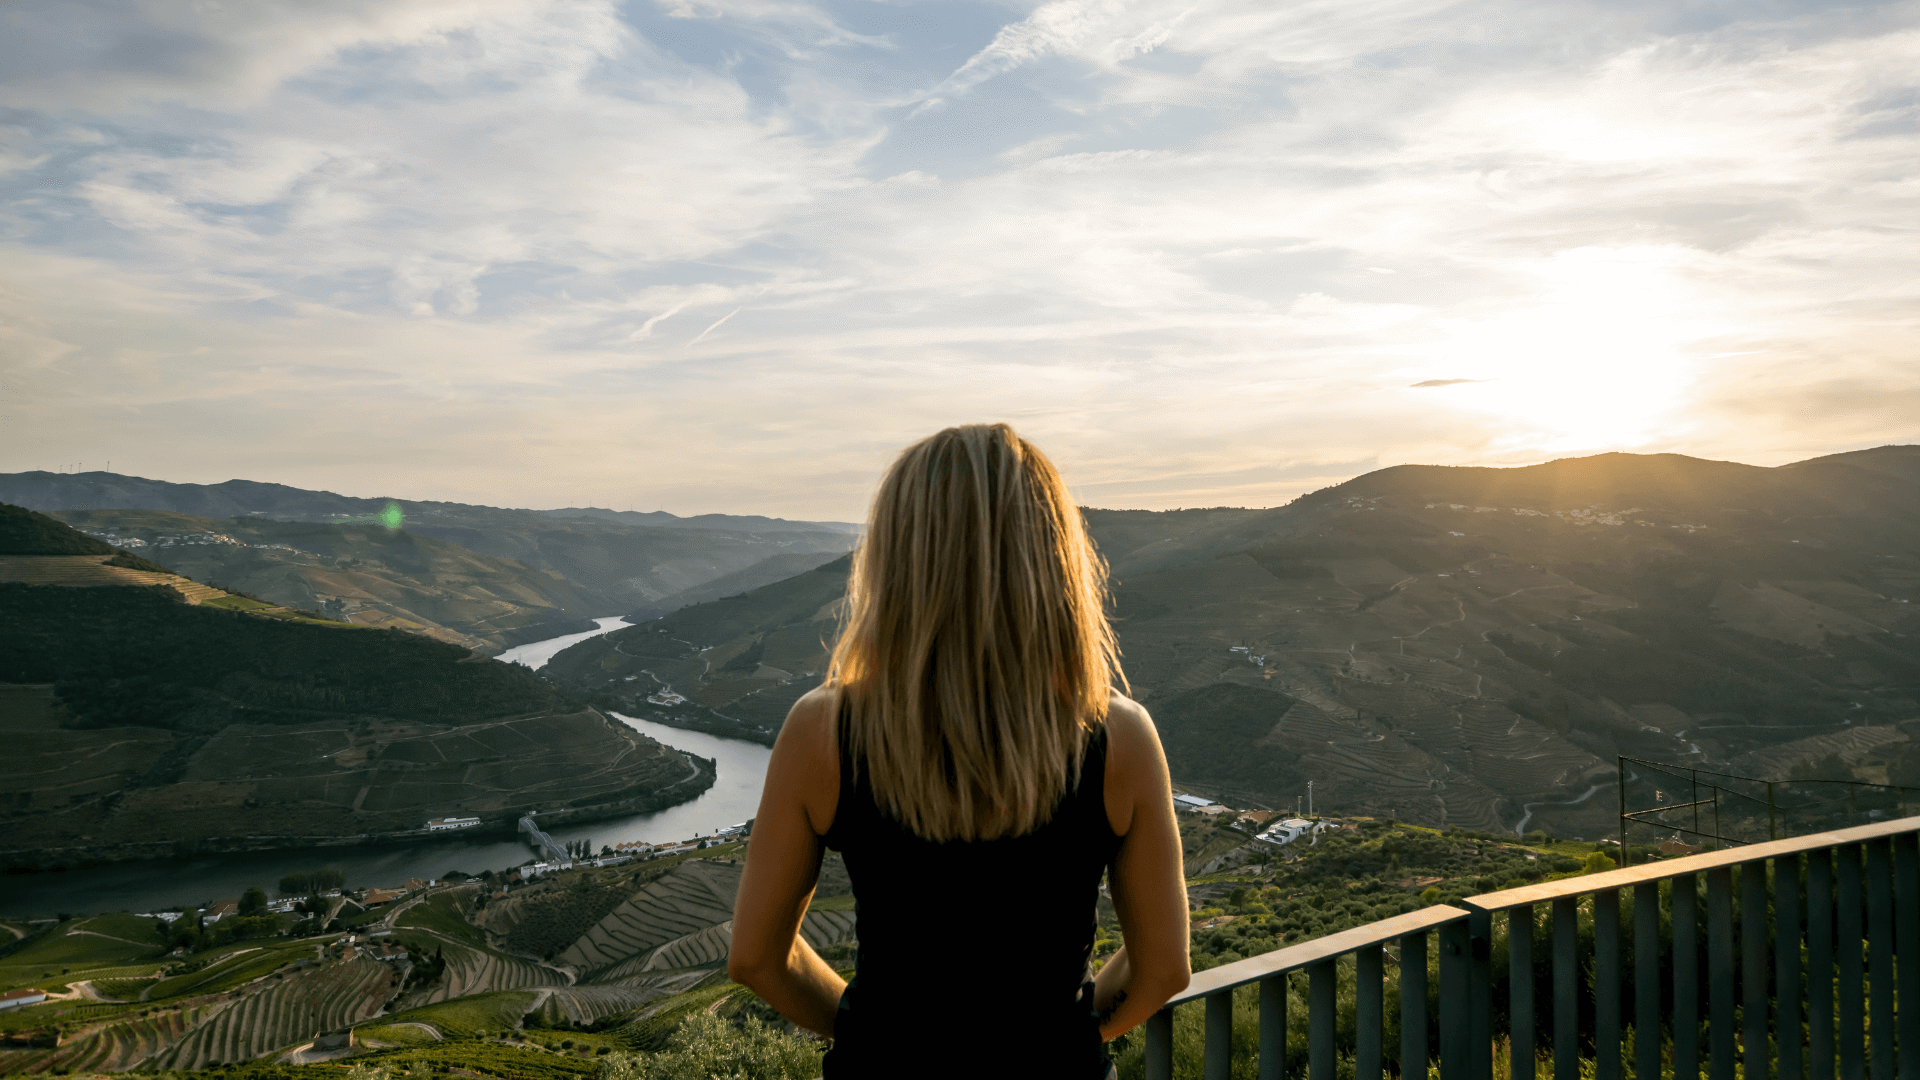 Viewpoint overlooking the Douro River